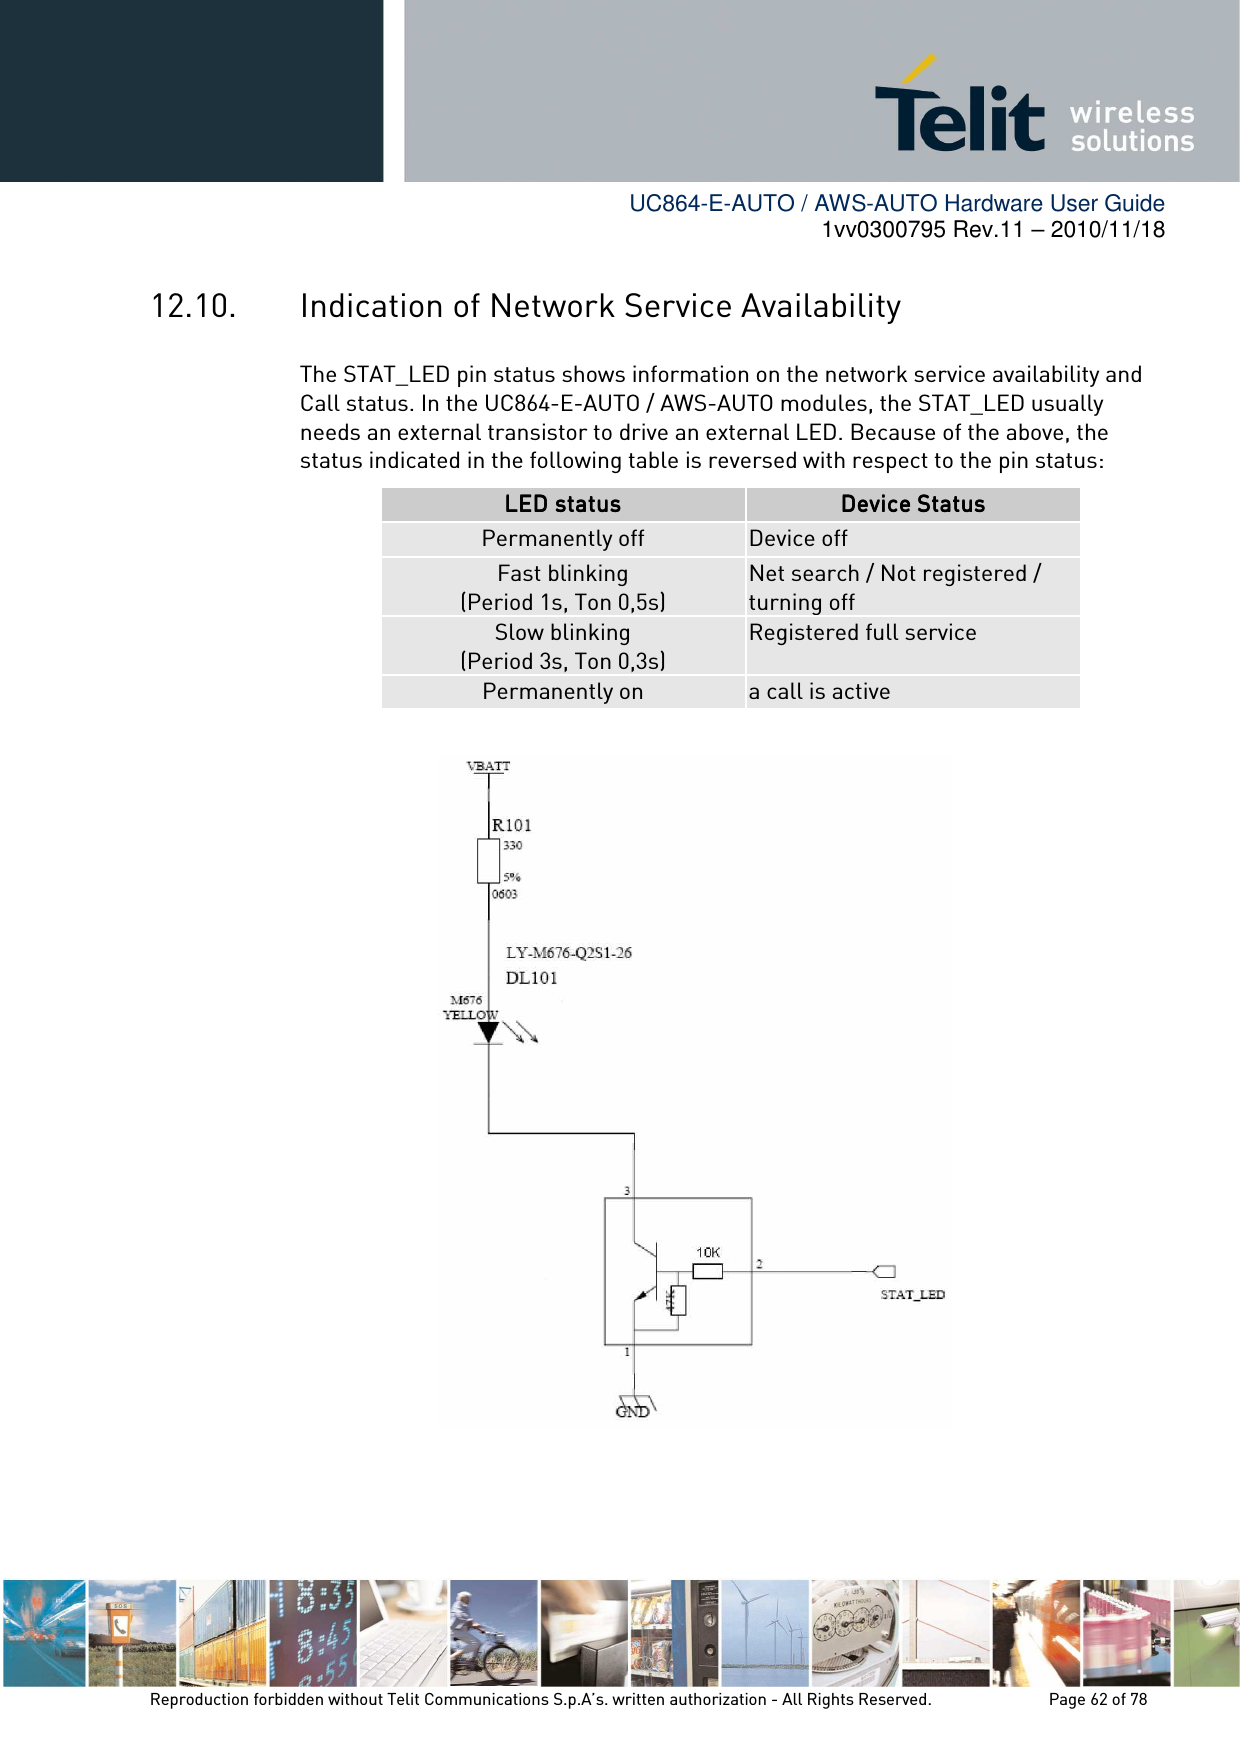        UC864-E-AUTO / AWS-AUTO Hardware User Guide 1vv0300795 Rev.11 – 2010/11/18     Reproduction forbidden without Telit Communications S.p.A’s. written authorization - All Rights Reserved.    Page 62 of 78  12.10. Indication of Network Service Availability The STAT_LED pin status shows information on the network service availability and Call status. In the UC864-E-AUTO / AWS-AUTO modules, the STAT_LED usually needs an external transistor to drive an external LED. Because of the above, the status indicated in the following table is reversed with respect to the pin status: LED statusLED statusLED statusLED status     DeviceDeviceDeviceDevice StatusStatusStatusStatus Permanently off  Device off Fast blinking (Period 1s, Ton 0,5s) Net search / Not registered / turning off Slow blinking (Period 3s, Ton 0,3s) Registered full service Permanently on  a call is active    